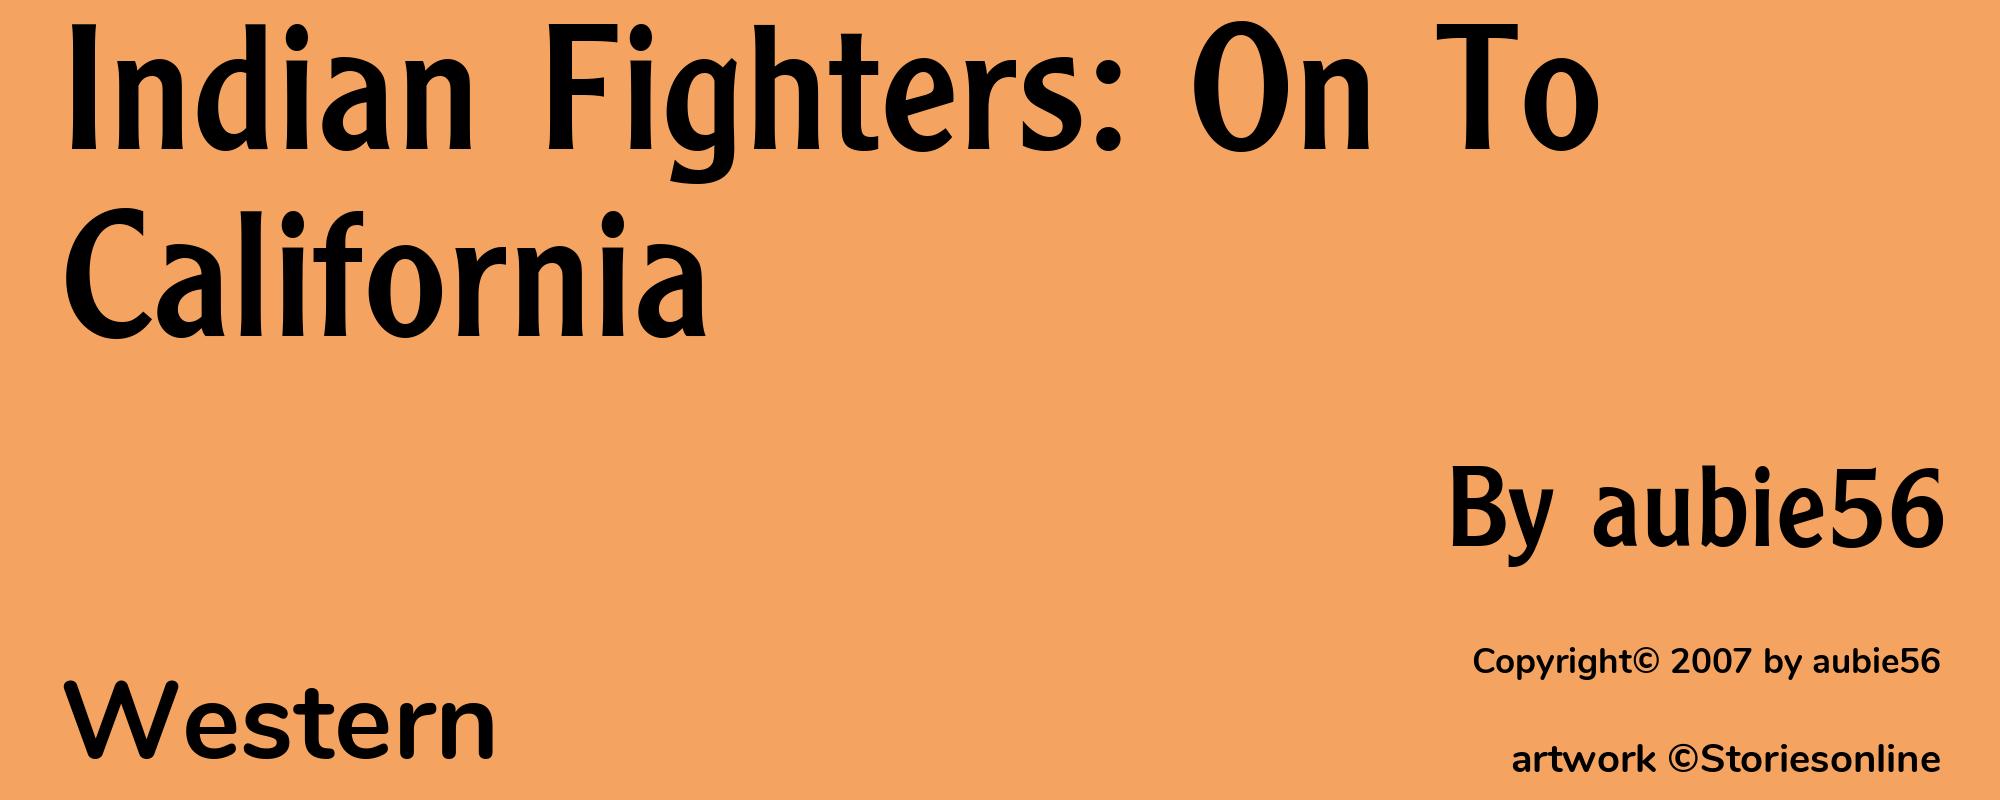 Indian Fighters: On To California - Cover